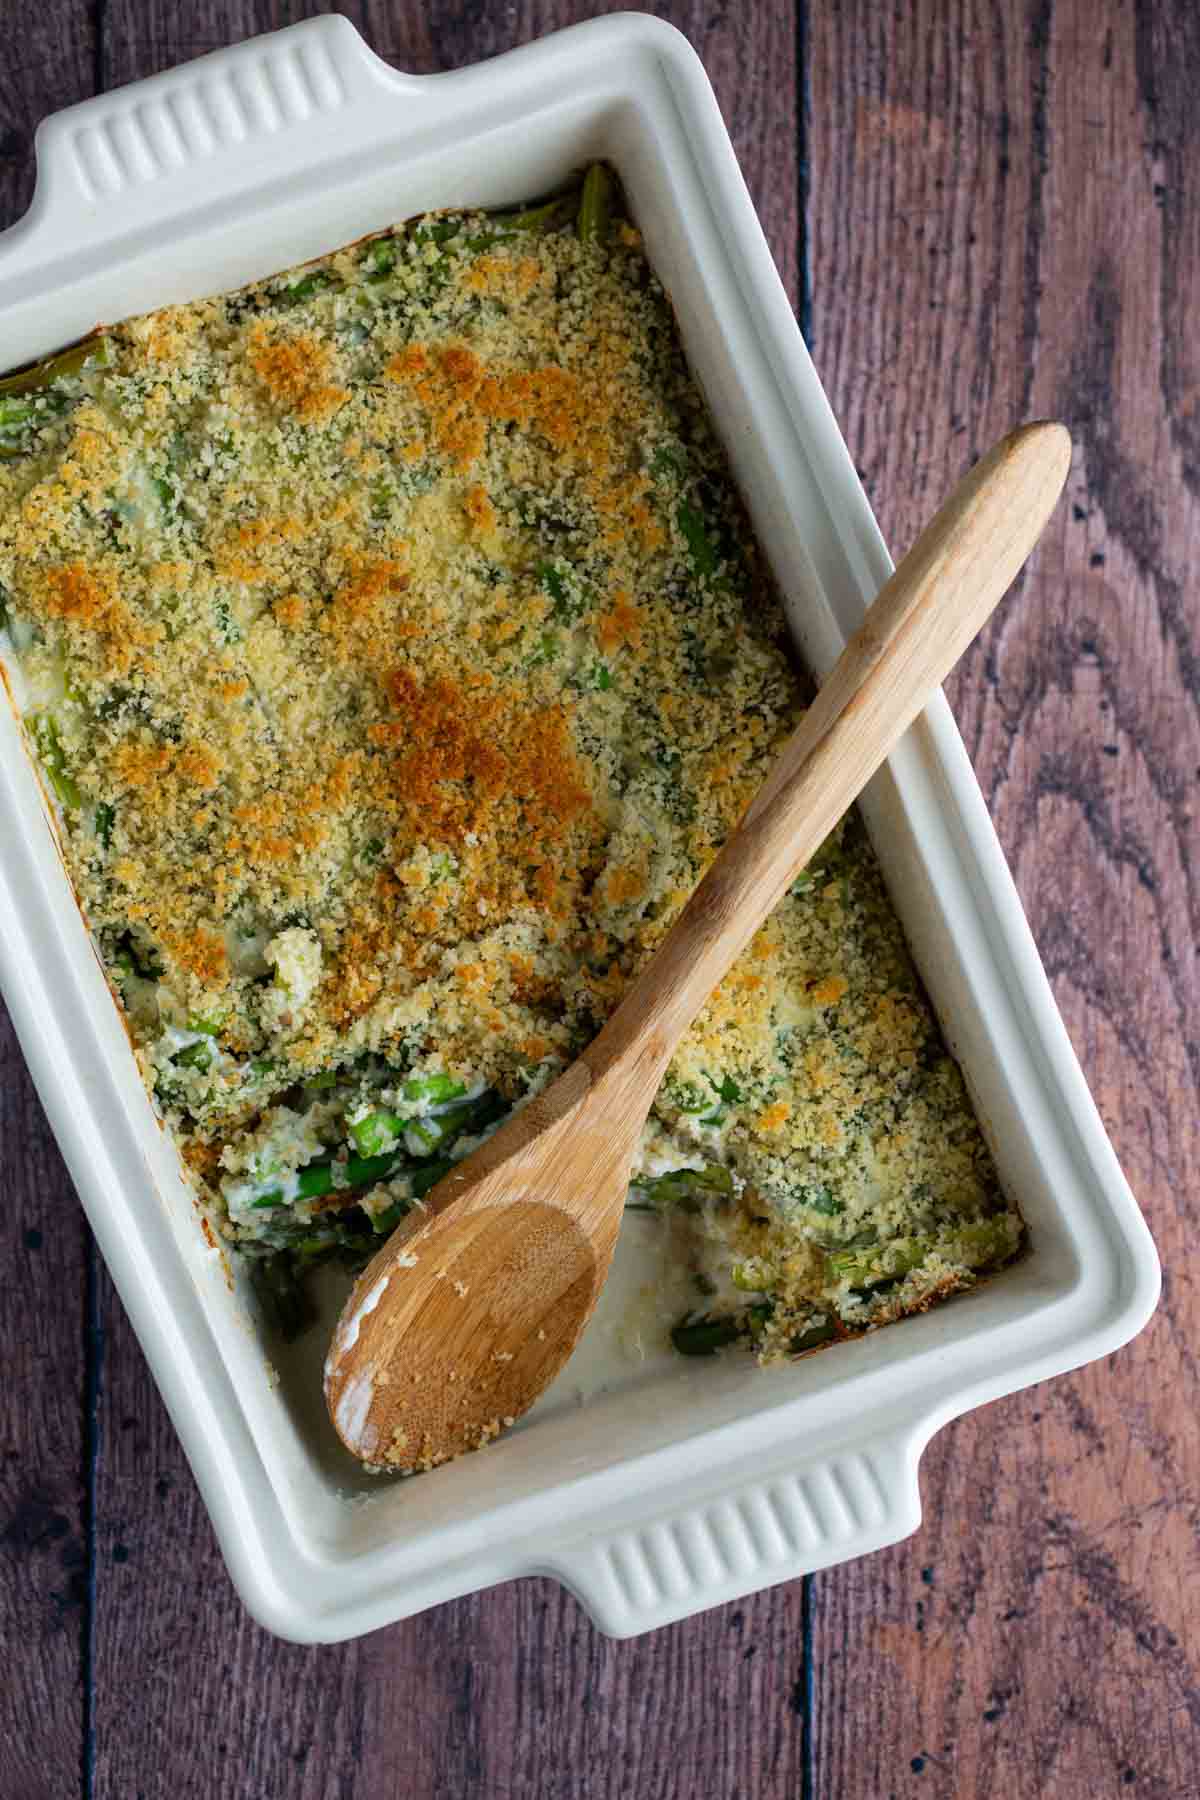 Baked casserole in a white dish with a wooden spoon.